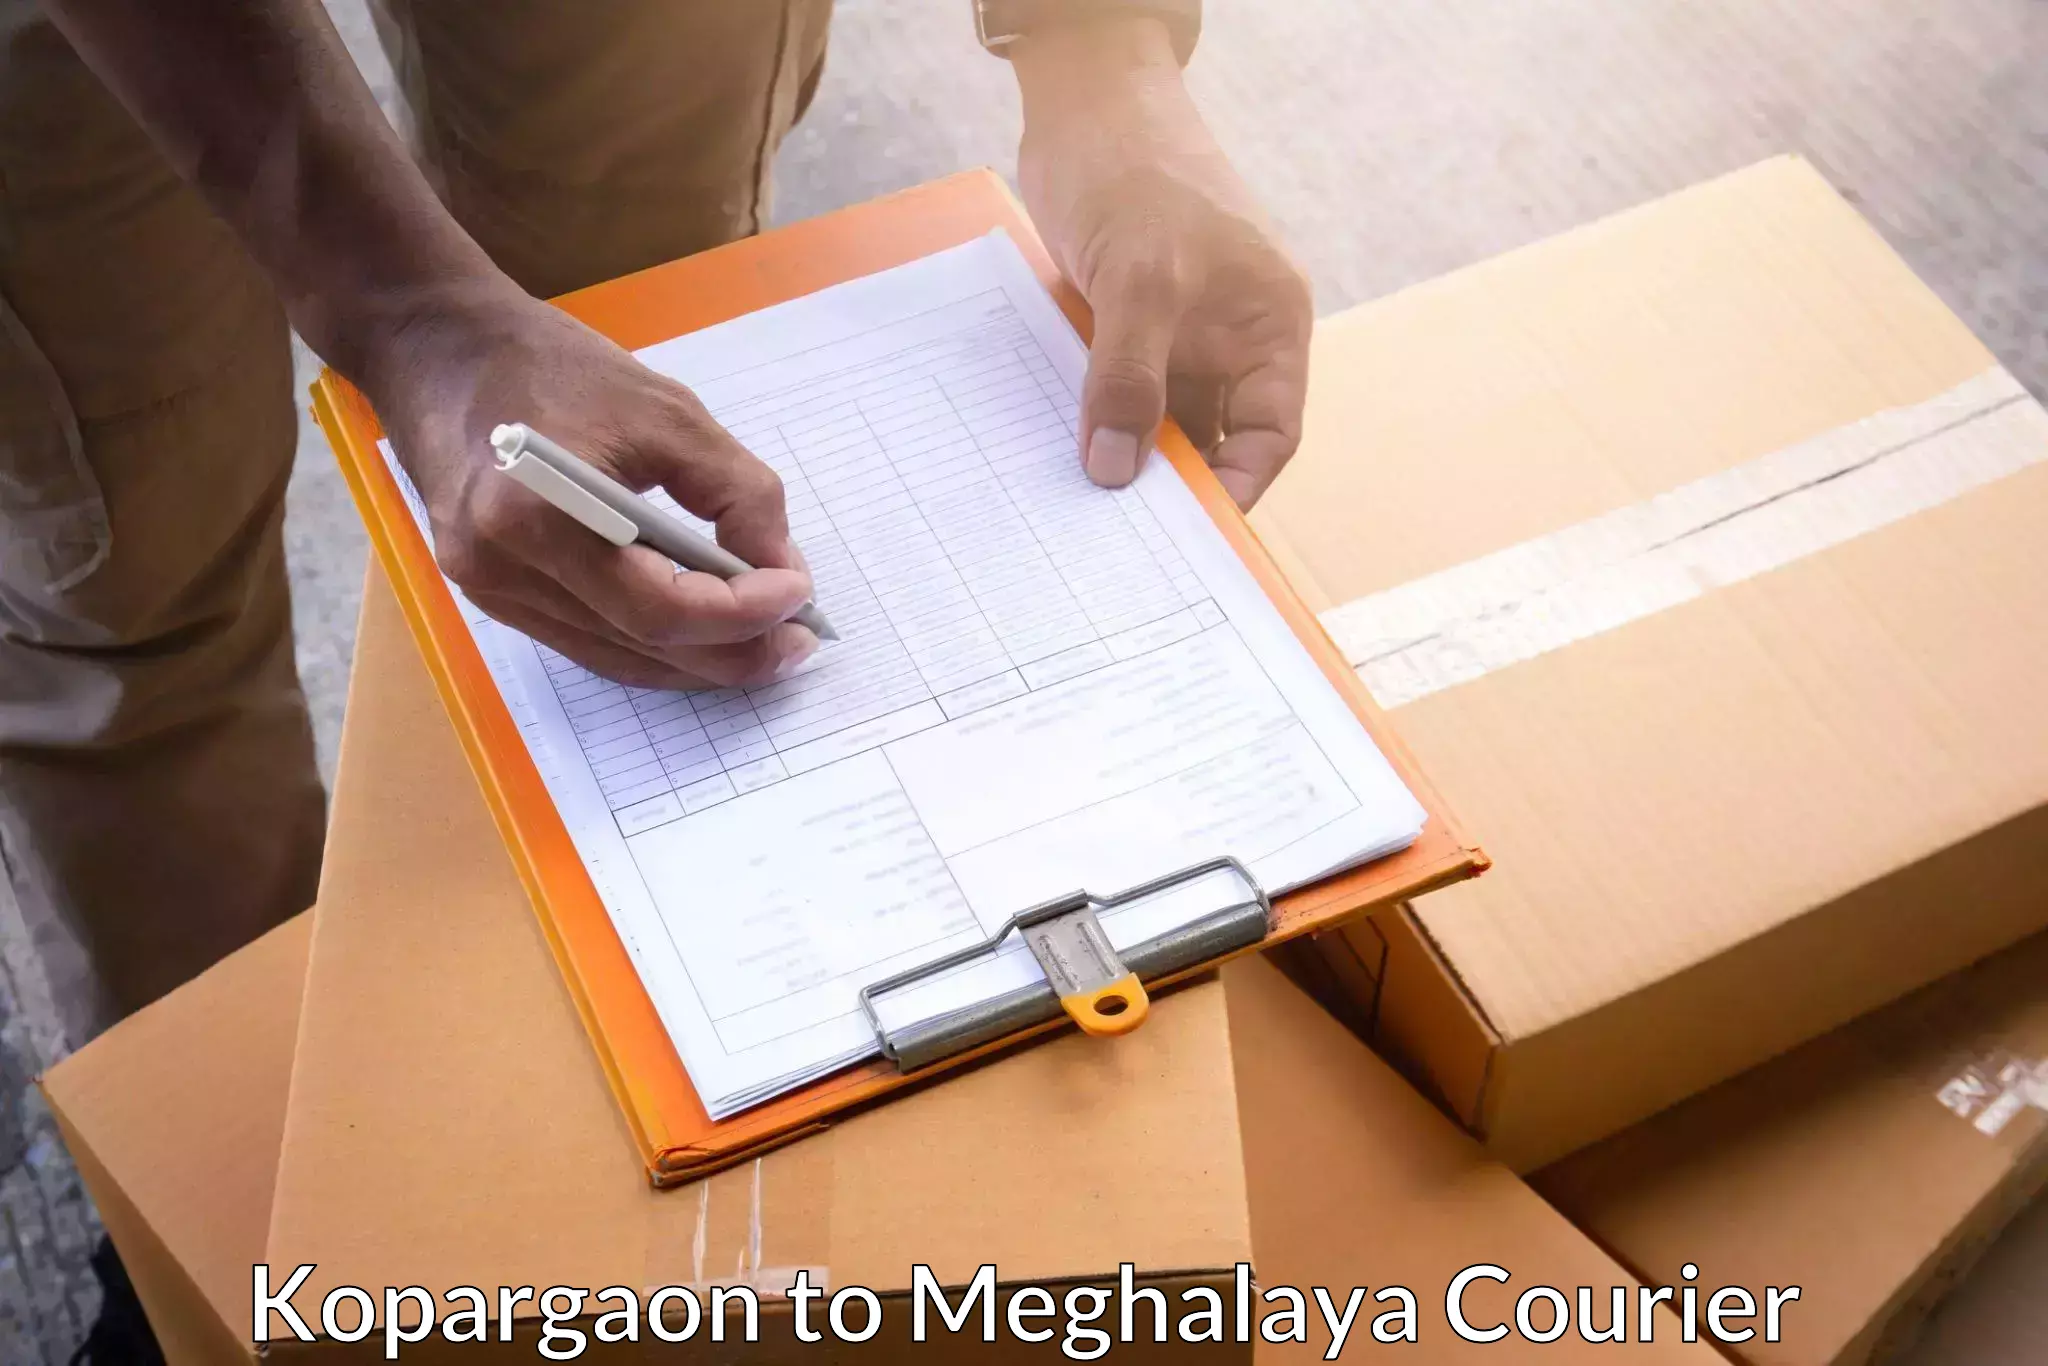 Next-day delivery options Kopargaon to Shillong